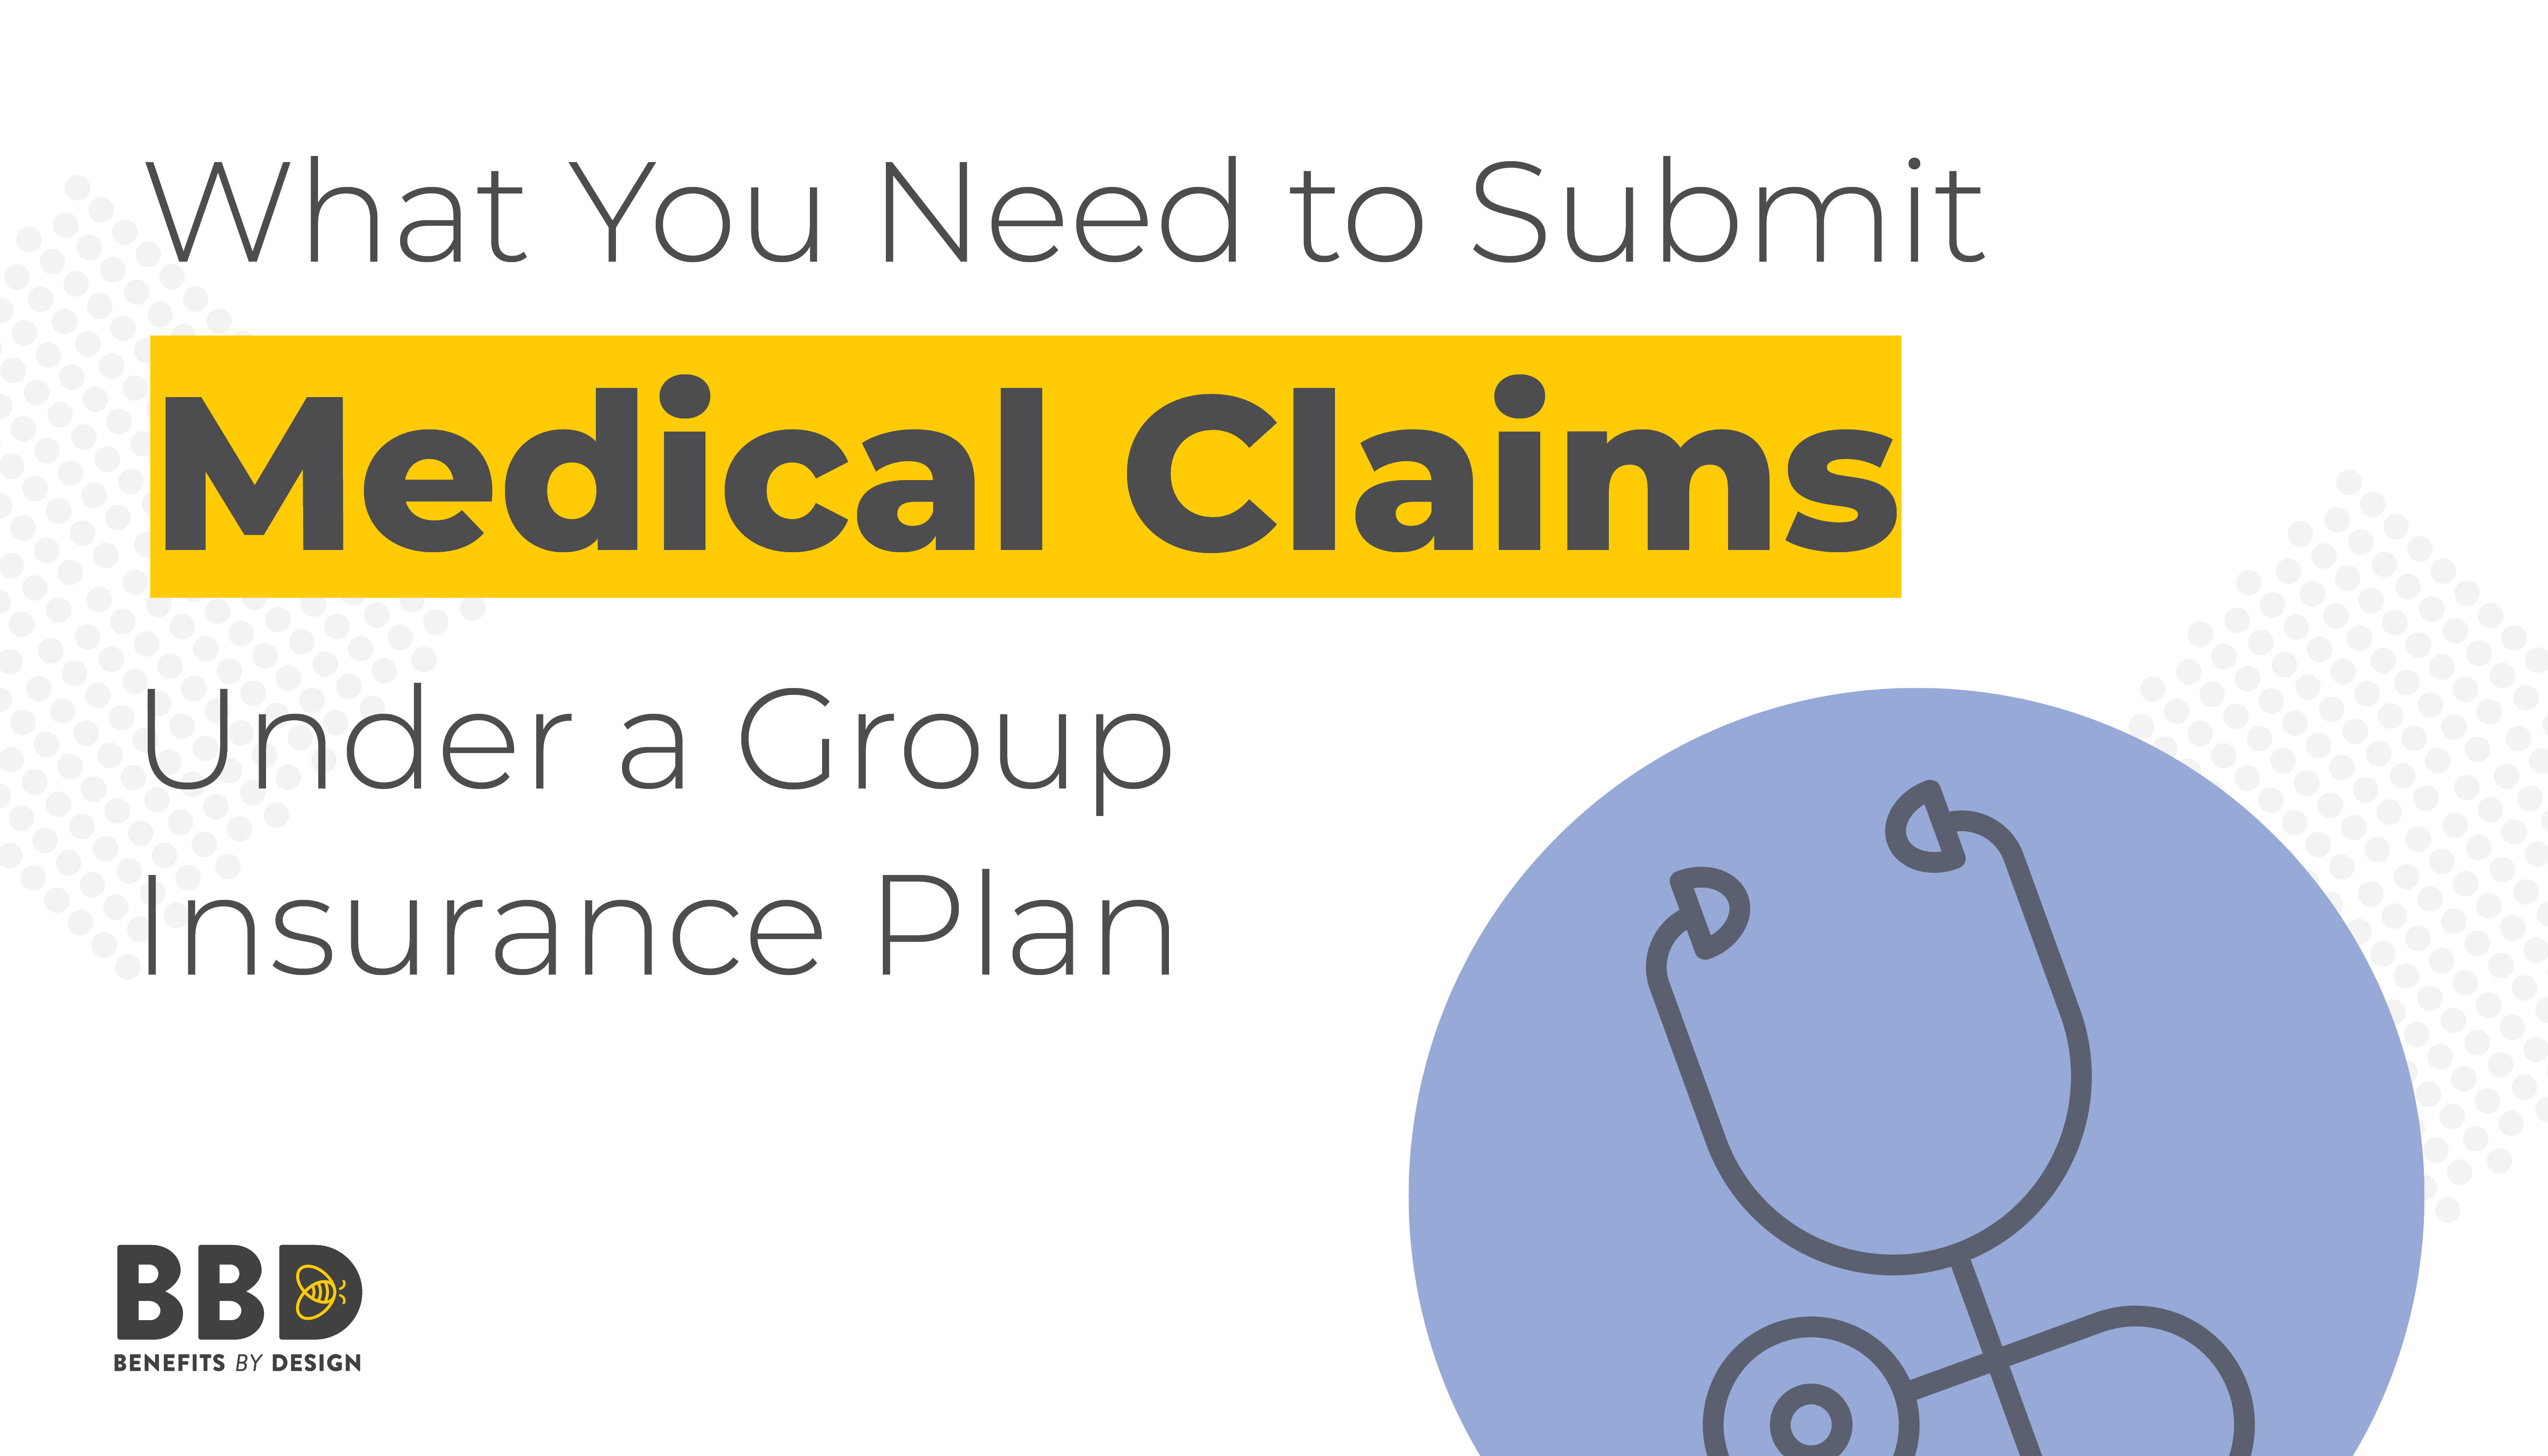 What you need to submit Medical Claims under a group insurance plan